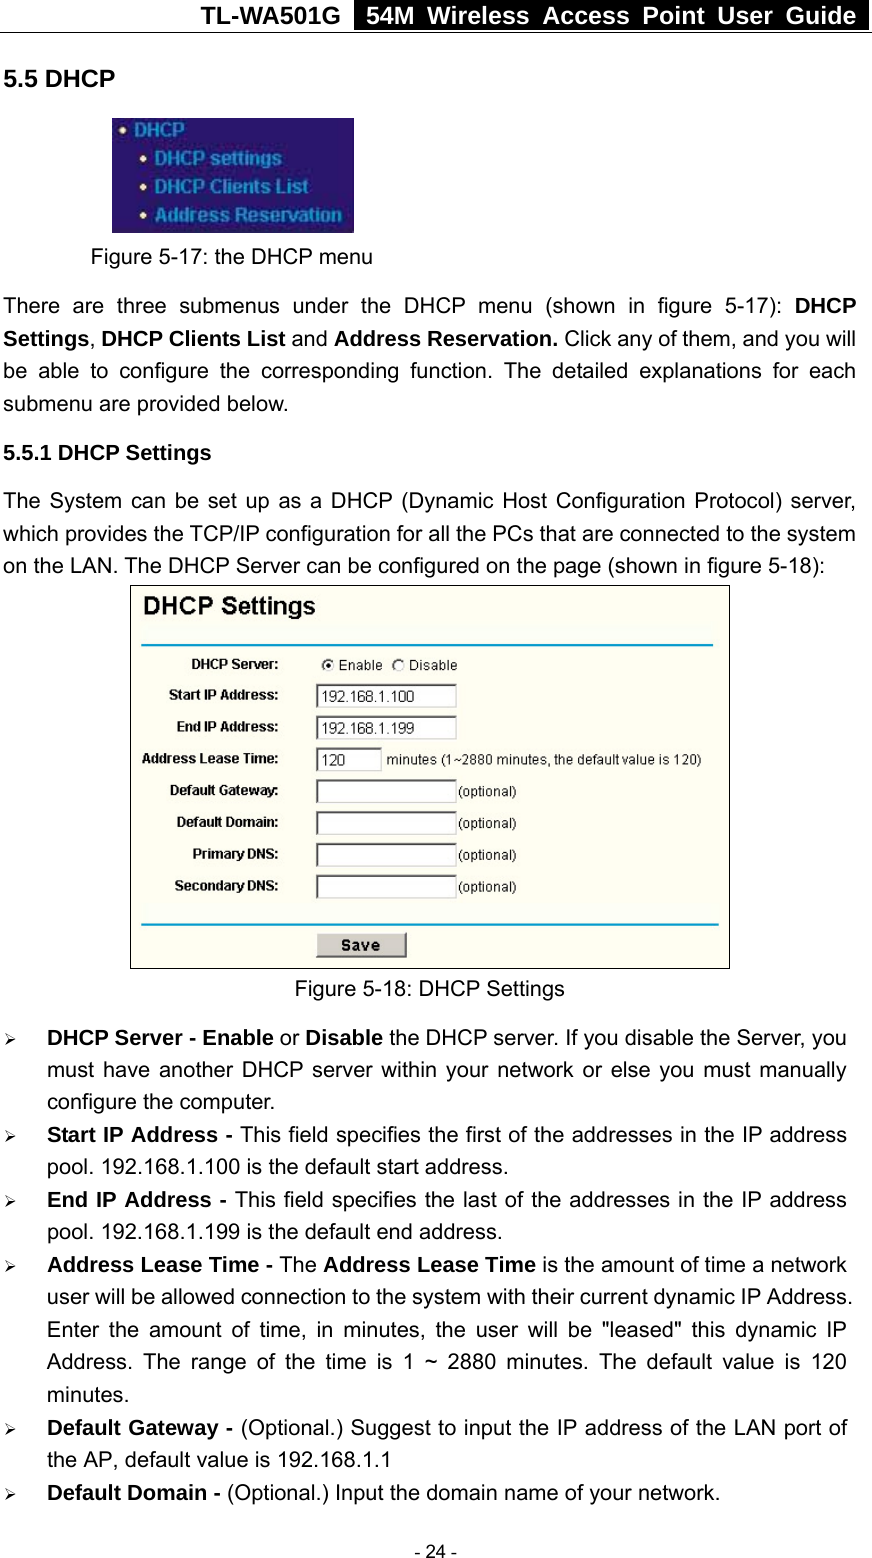 TL-WA501G   54M Wireless Access Point User Guide  5.5 DHCP  Figure 5-17: the DHCP menu There are three submenus under the DHCP menu (shown in figure 5-17): DHCP Settings, DHCP Clients List and Address Reservation. Click any of them, and you will be able to configure the corresponding function. The detailed explanations for each submenu are provided below. 5.5.1 DHCP Settings The System can be set up as a DHCP (Dynamic Host Configuration Protocol) server, which provides the TCP/IP configuration for all the PCs that are connected to the system on the LAN. The DHCP Server can be configured on the page (shown in figure 5-18):  Figure 5-18: DHCP Settings ¾ DHCP Server - Enable or Disable the DHCP server. If you disable the Server, you must have another DHCP server within your network or else you must manually configure the computer. ¾ Start IP Address - This field specifies the first of the addresses in the IP address pool. 192.168.1.100 is the default start address. ¾ End IP Address - This field specifies the last of the addresses in the IP address pool. 192.168.1.199 is the default end address. ¾ Address Lease Time - The Address Lease Time is the amount of time a network user will be allowed connection to the system with their current dynamic IP Address. Enter the amount of time, in minutes, the user will be &quot;leased&quot; this dynamic IP Address. The range of the time is 1 ~ 2880 minutes. The default value is 120 minutes. ¾ Default Gateway - (Optional.) Suggest to input the IP address of the LAN port of the AP, default value is 192.168.1.1 ¾ Default Domain - (Optional.) Input the domain name of your network.  - 24 - 